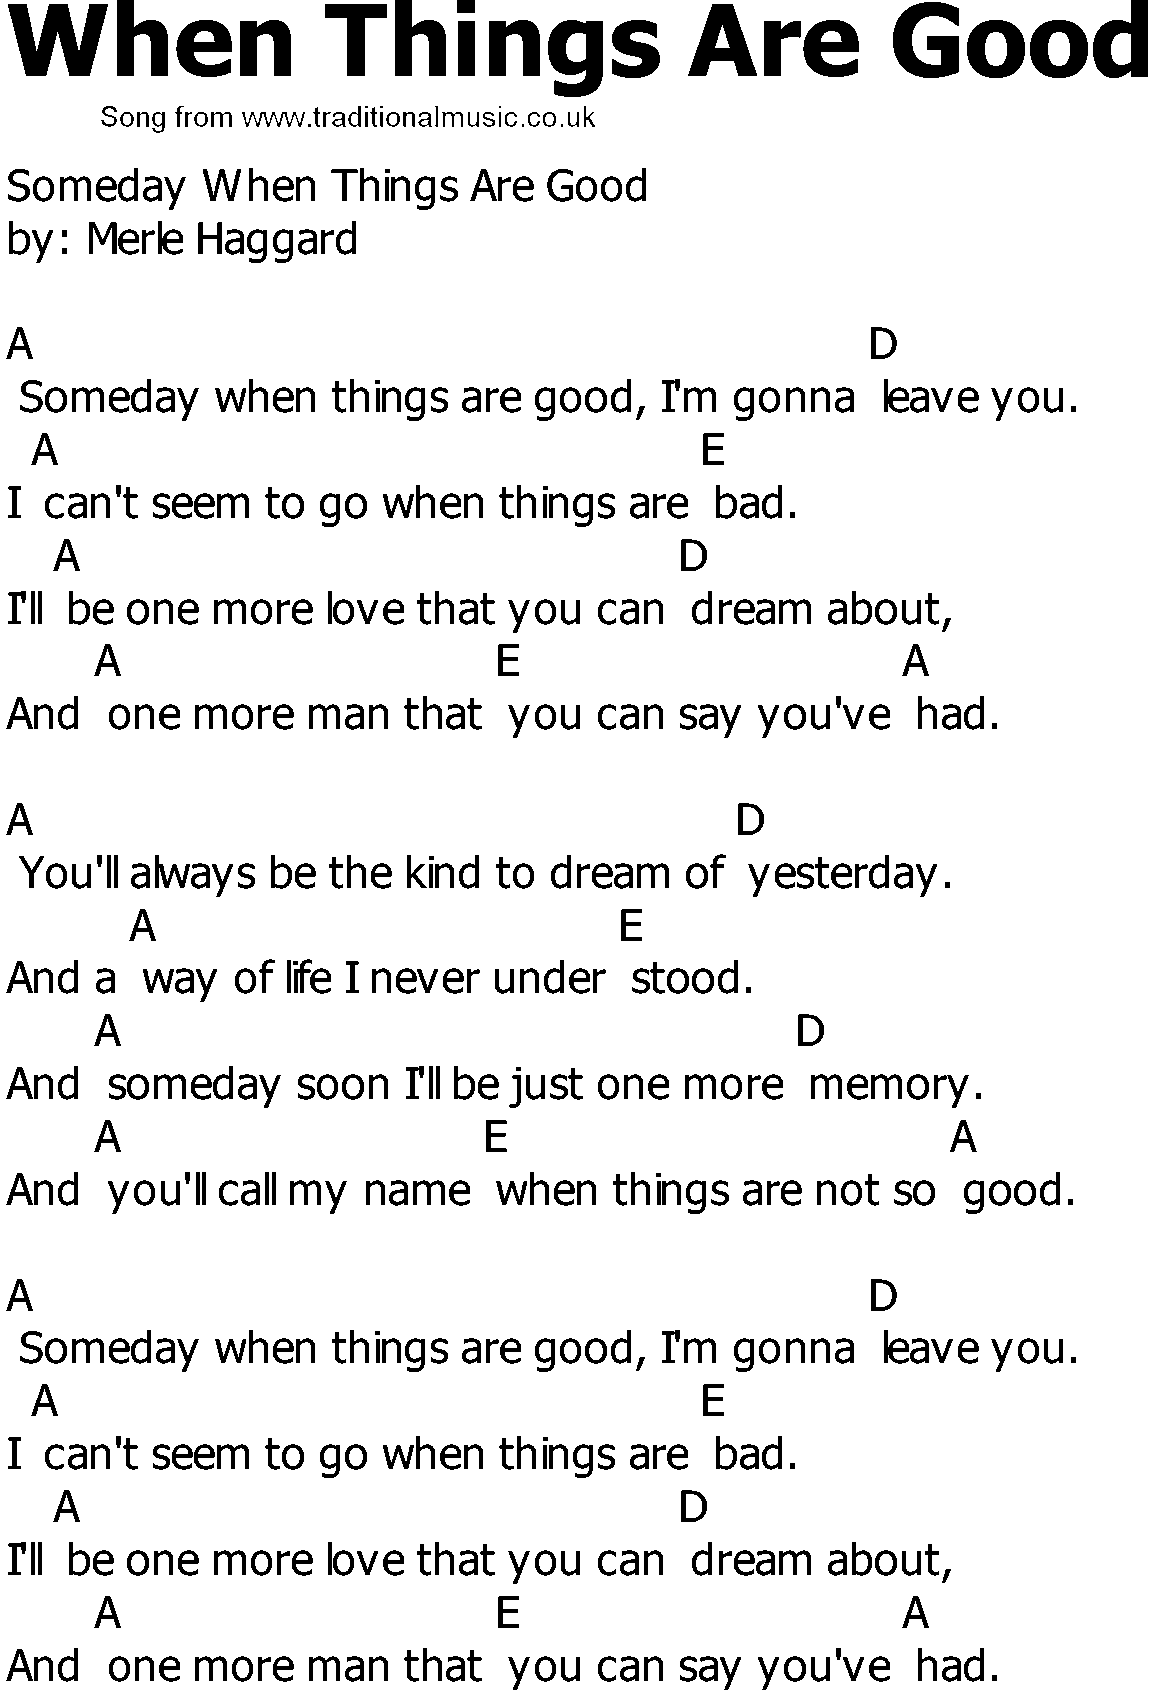 Old Country song lyrics with chords - When Things Are Good